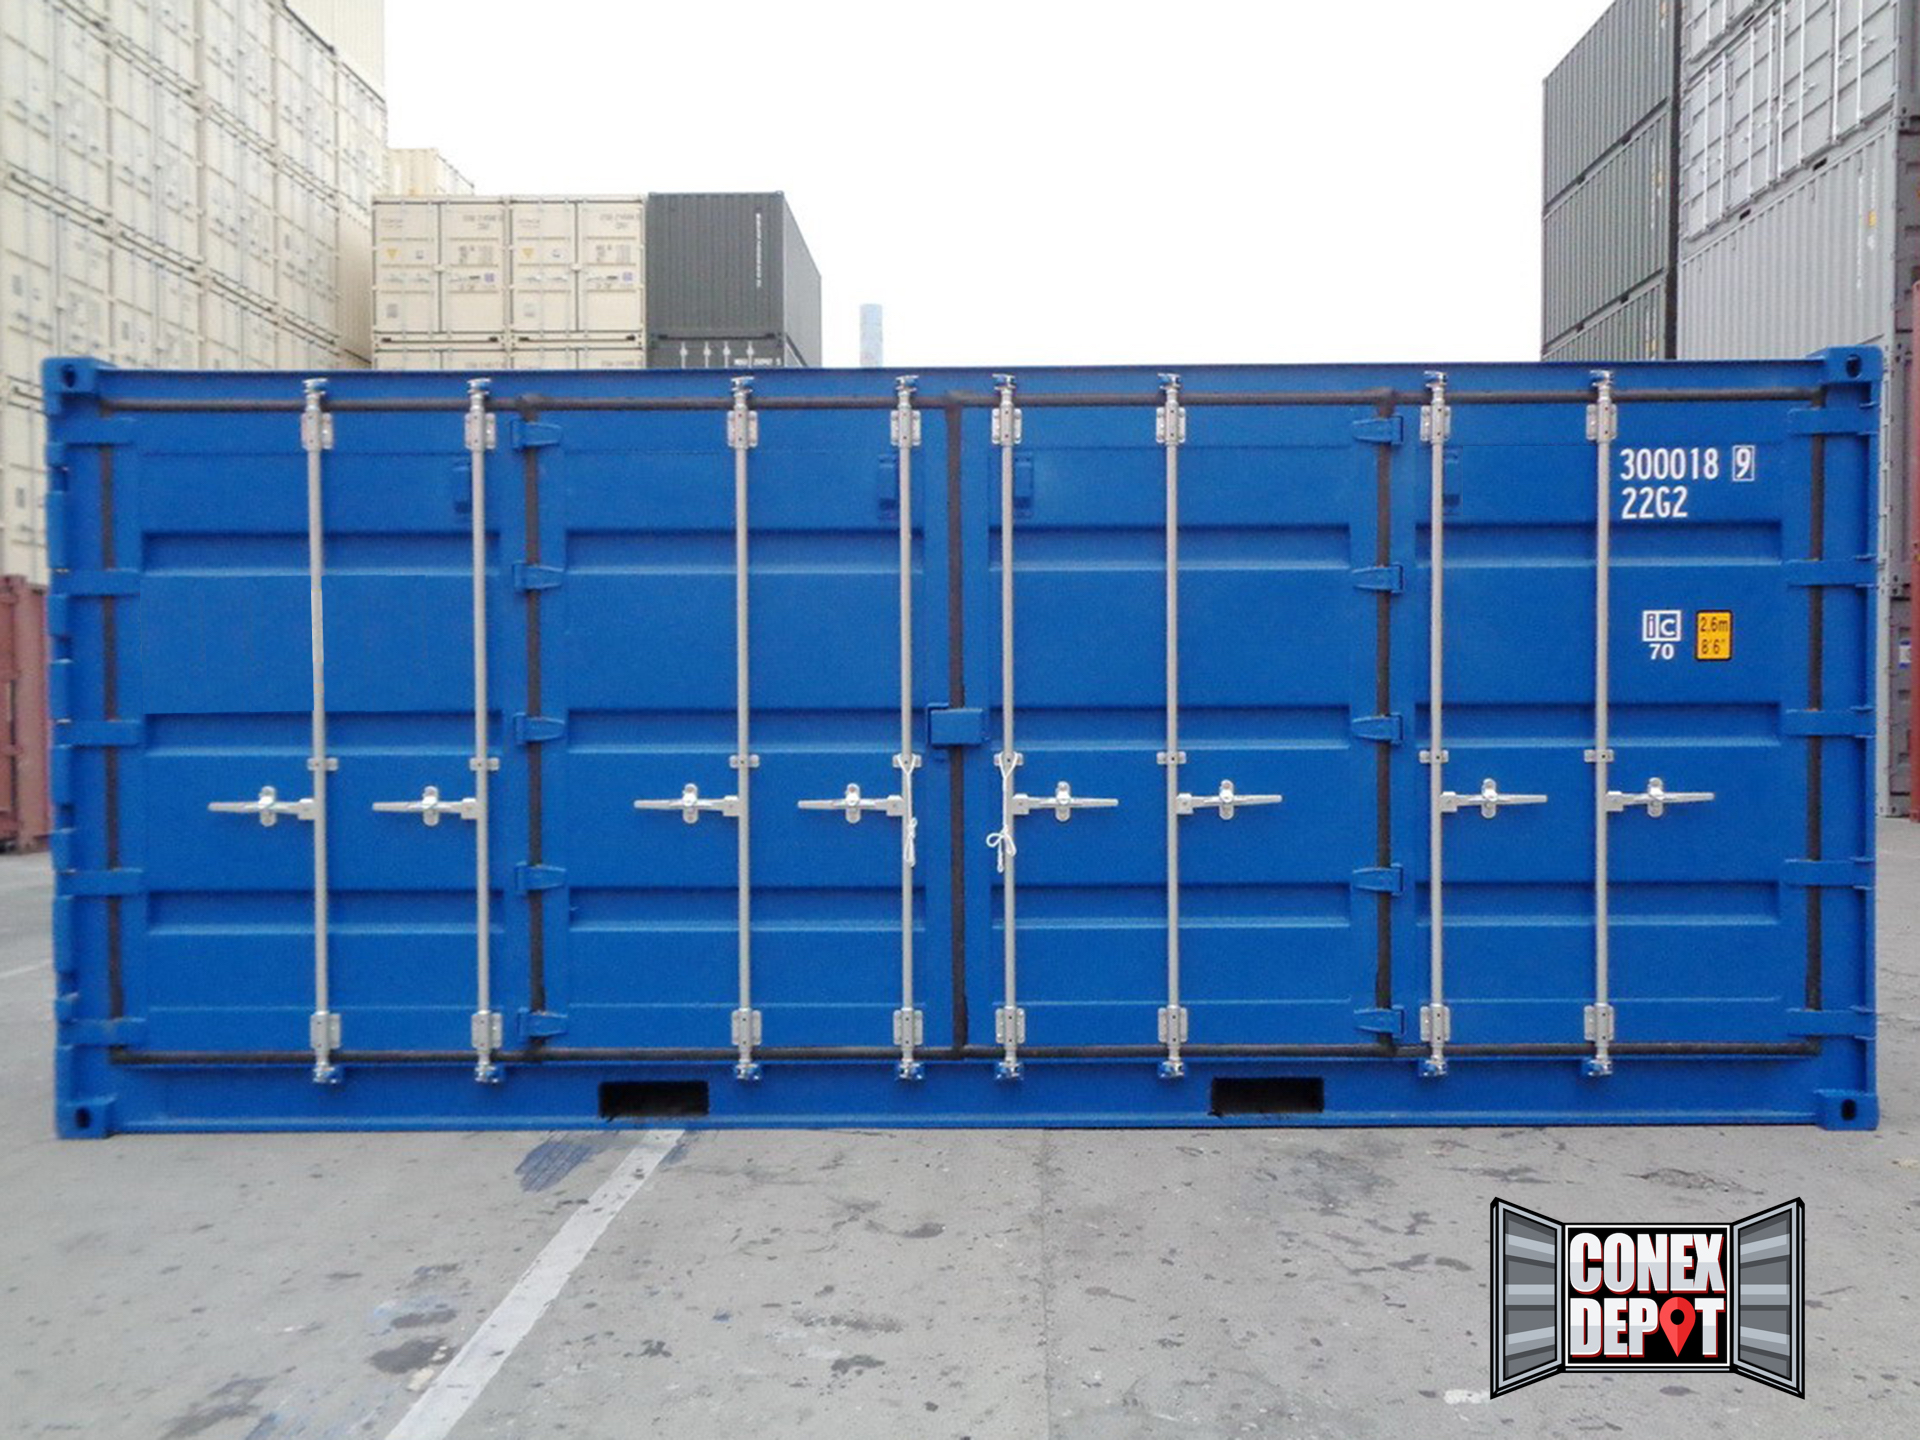 Modular Open-Sided Shipping Containers Features